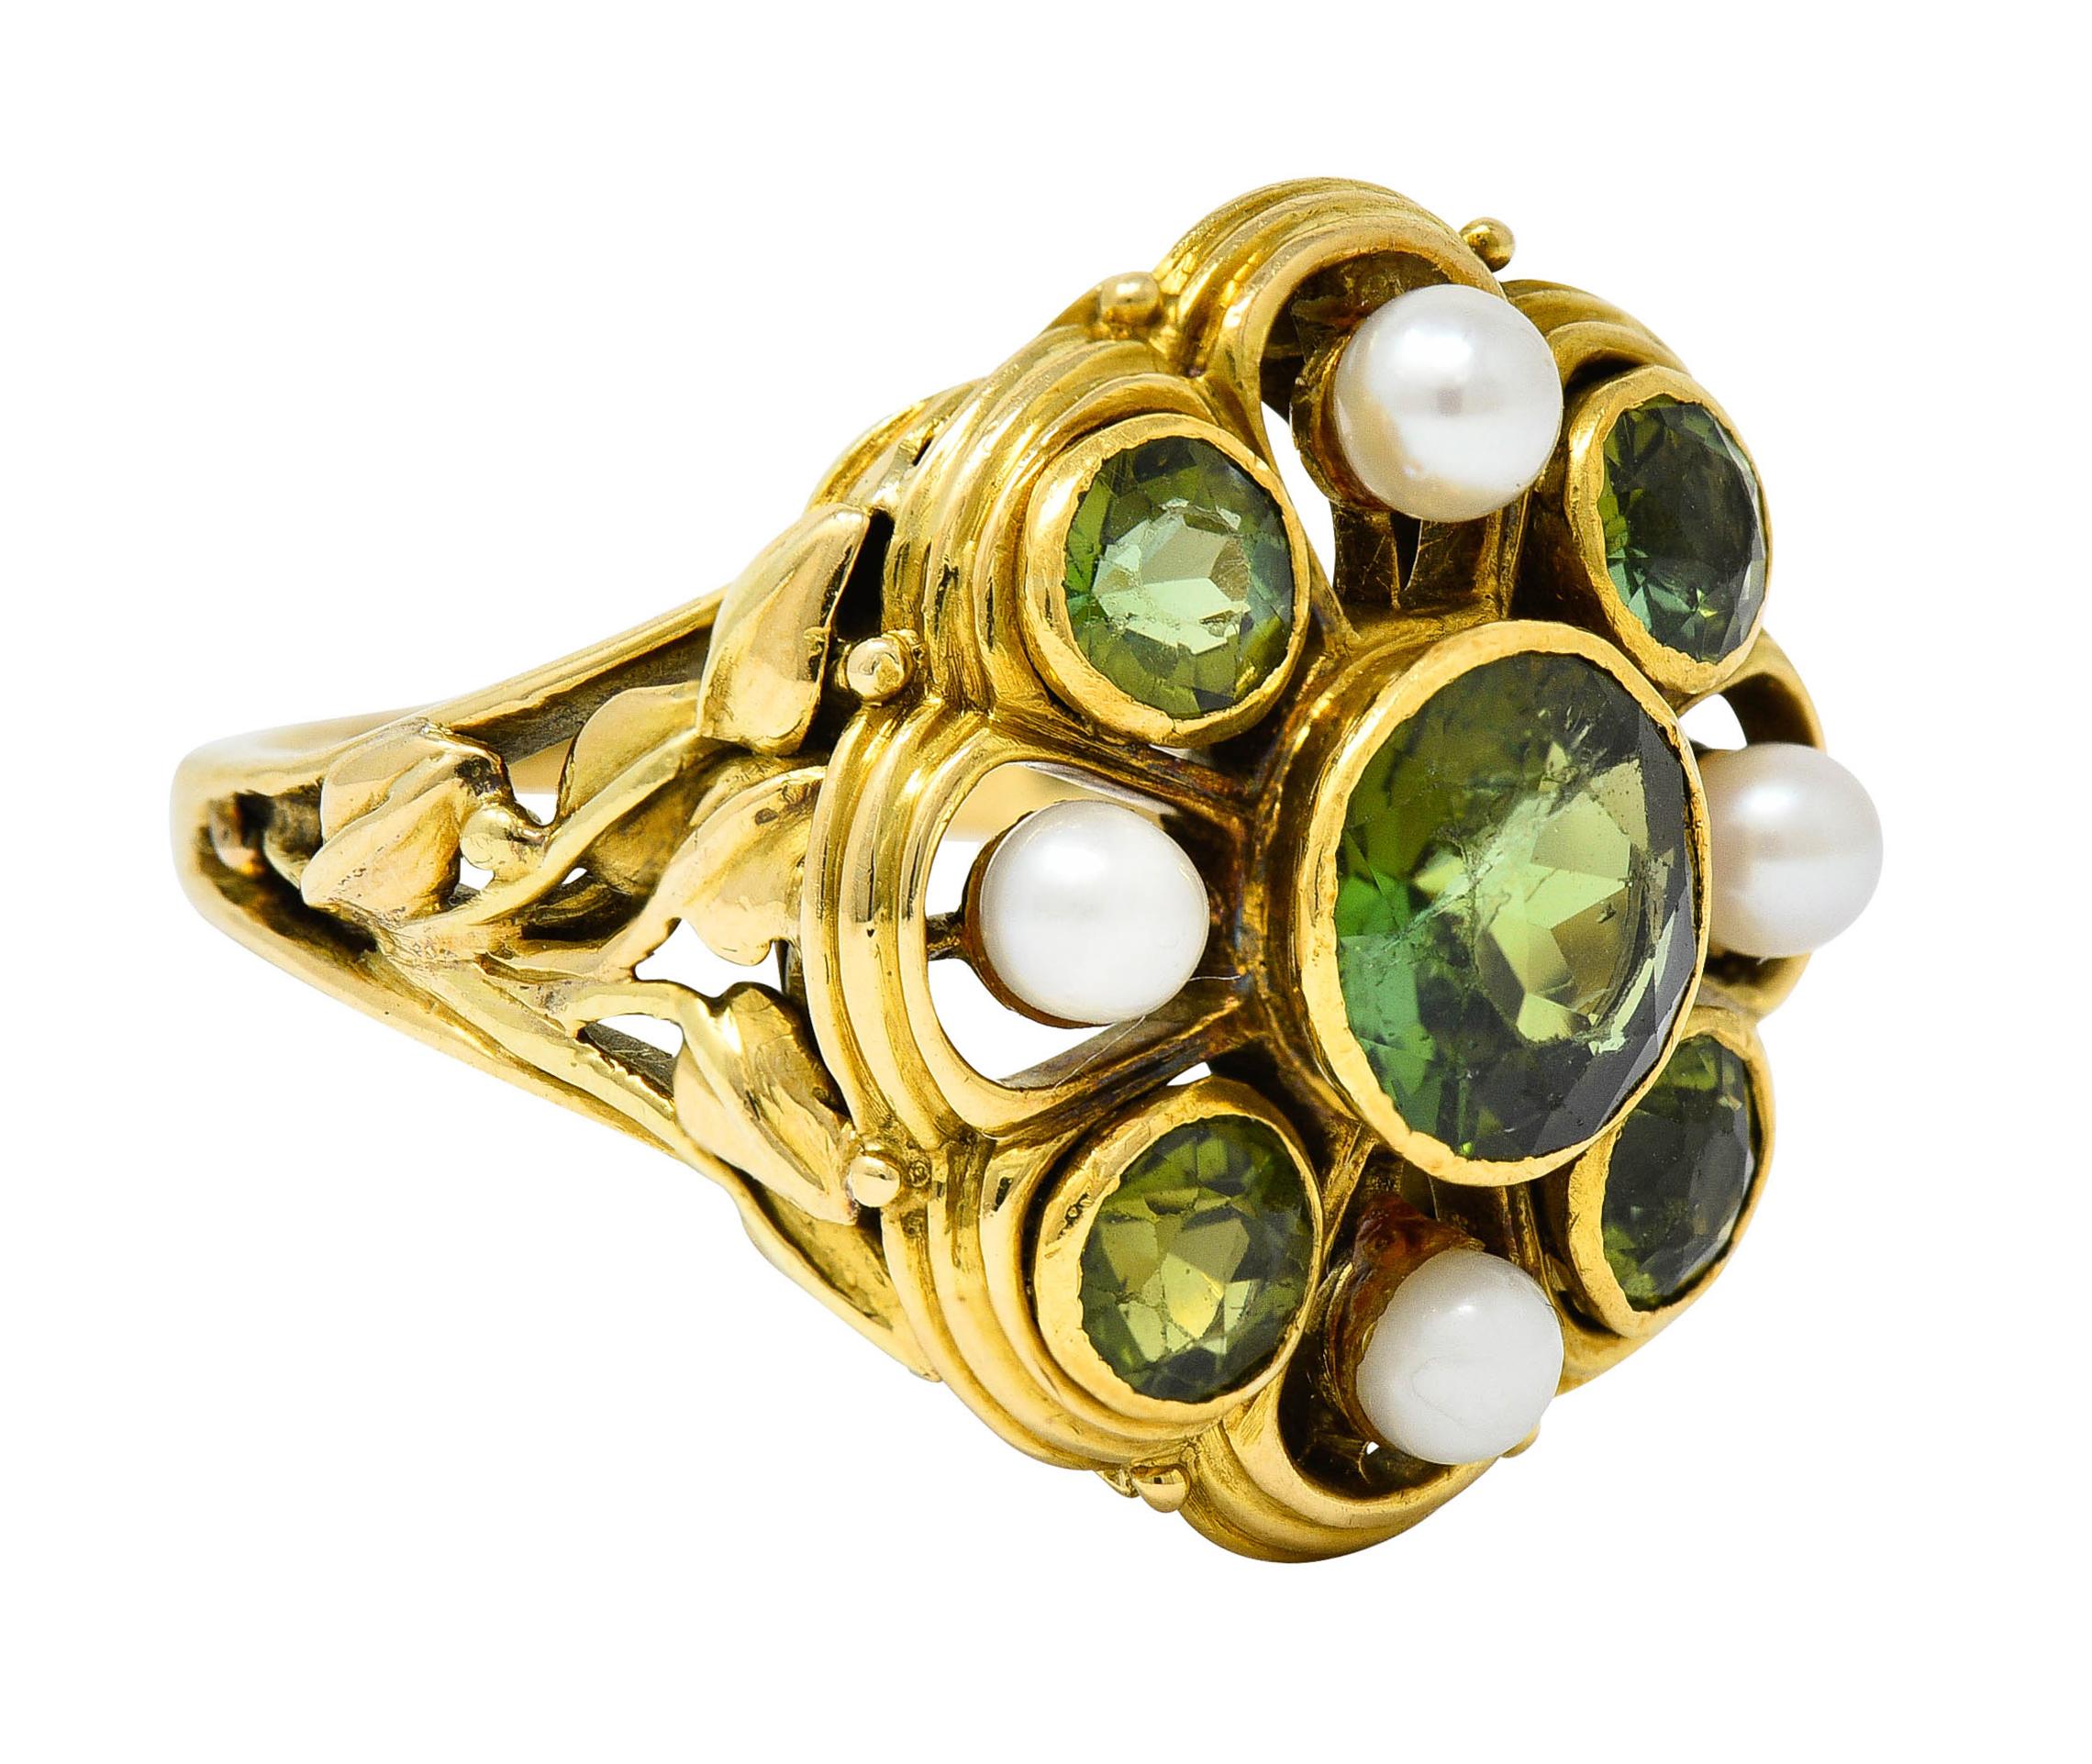 Designed as a circular cluster ring bezel set with five round cut tourmalines

Measuring from 7.8 mm to 4.0 mm with very well matched yellowish green color

Alternating with 3.2 mm round pearls - well matched white body color with good to very good